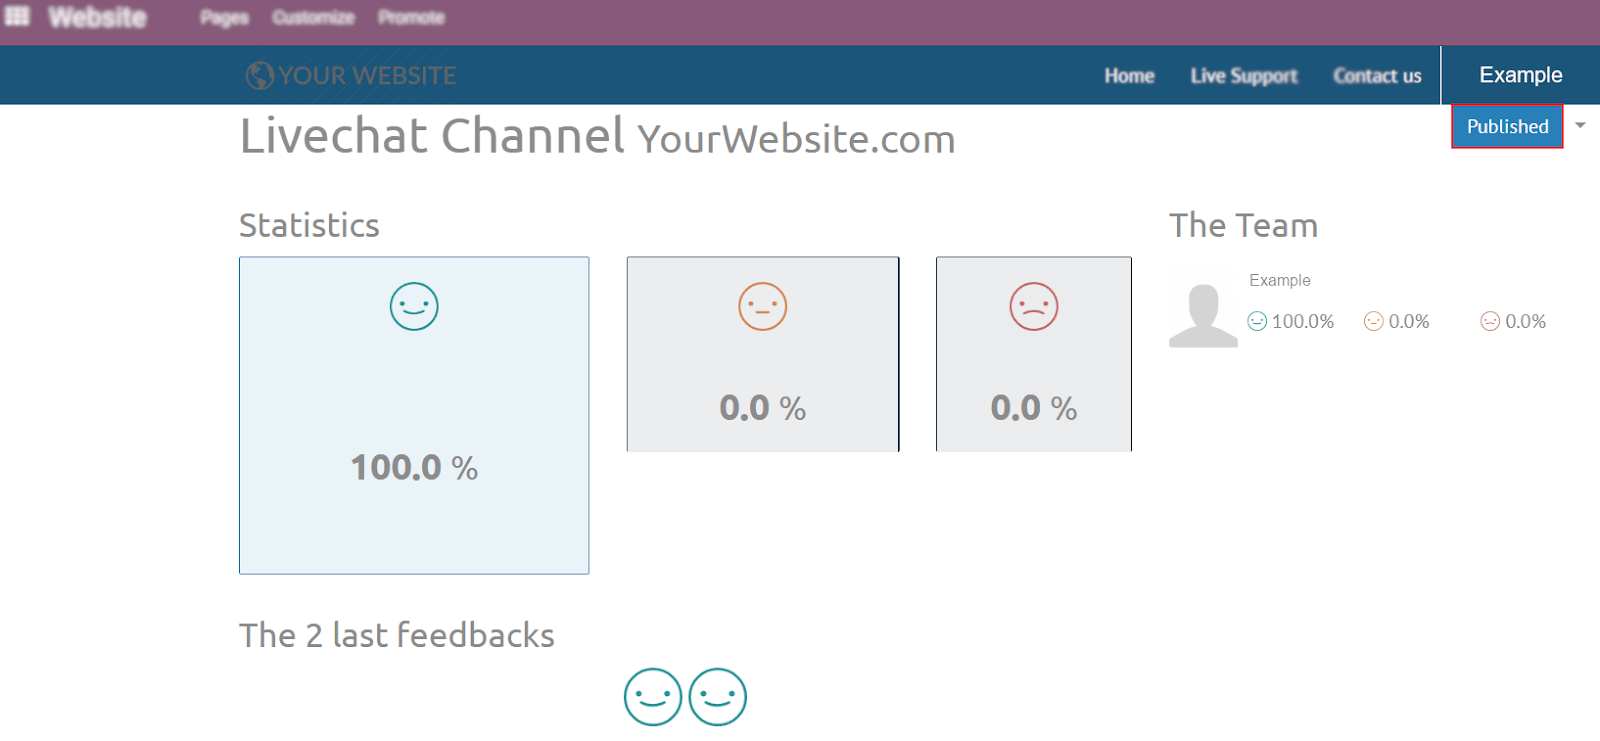 View of the public ratings in the website for CoquiAPPs Live Chat